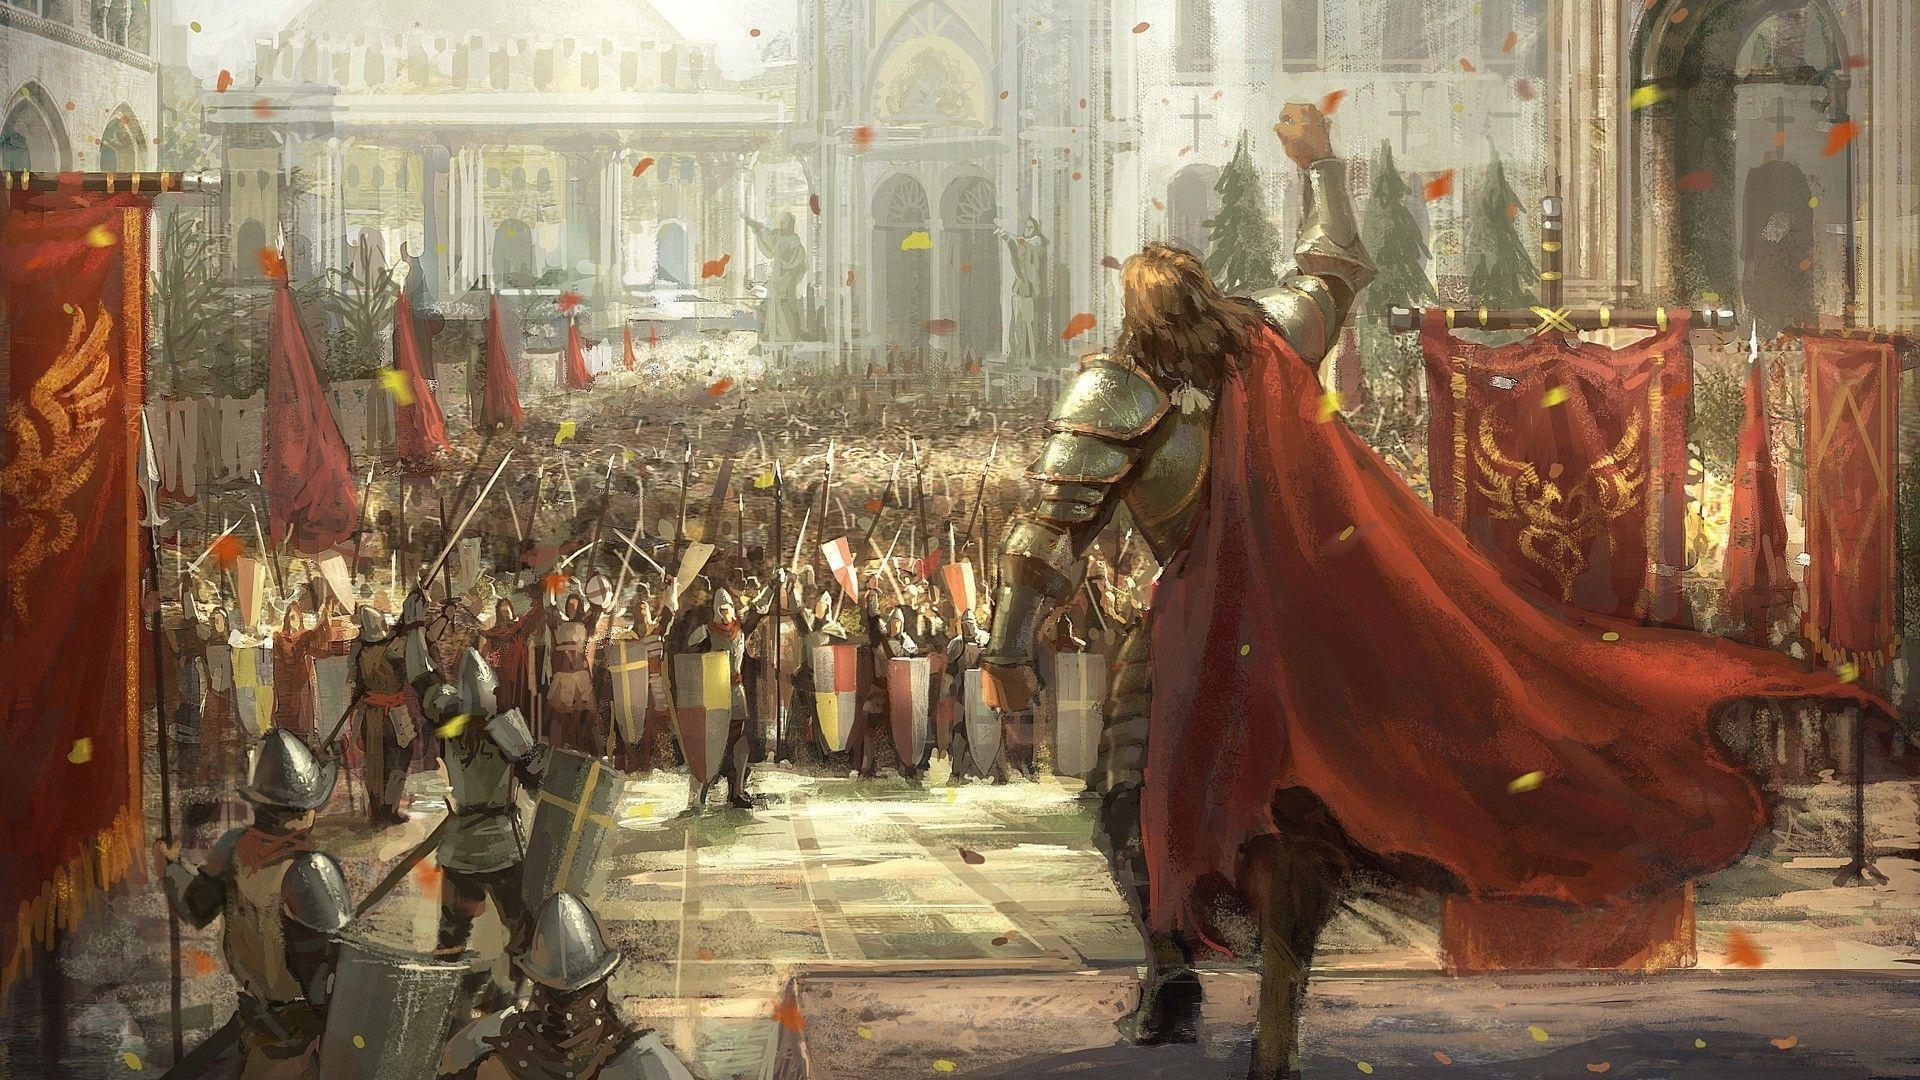 image For > Medieval Knight Artwork